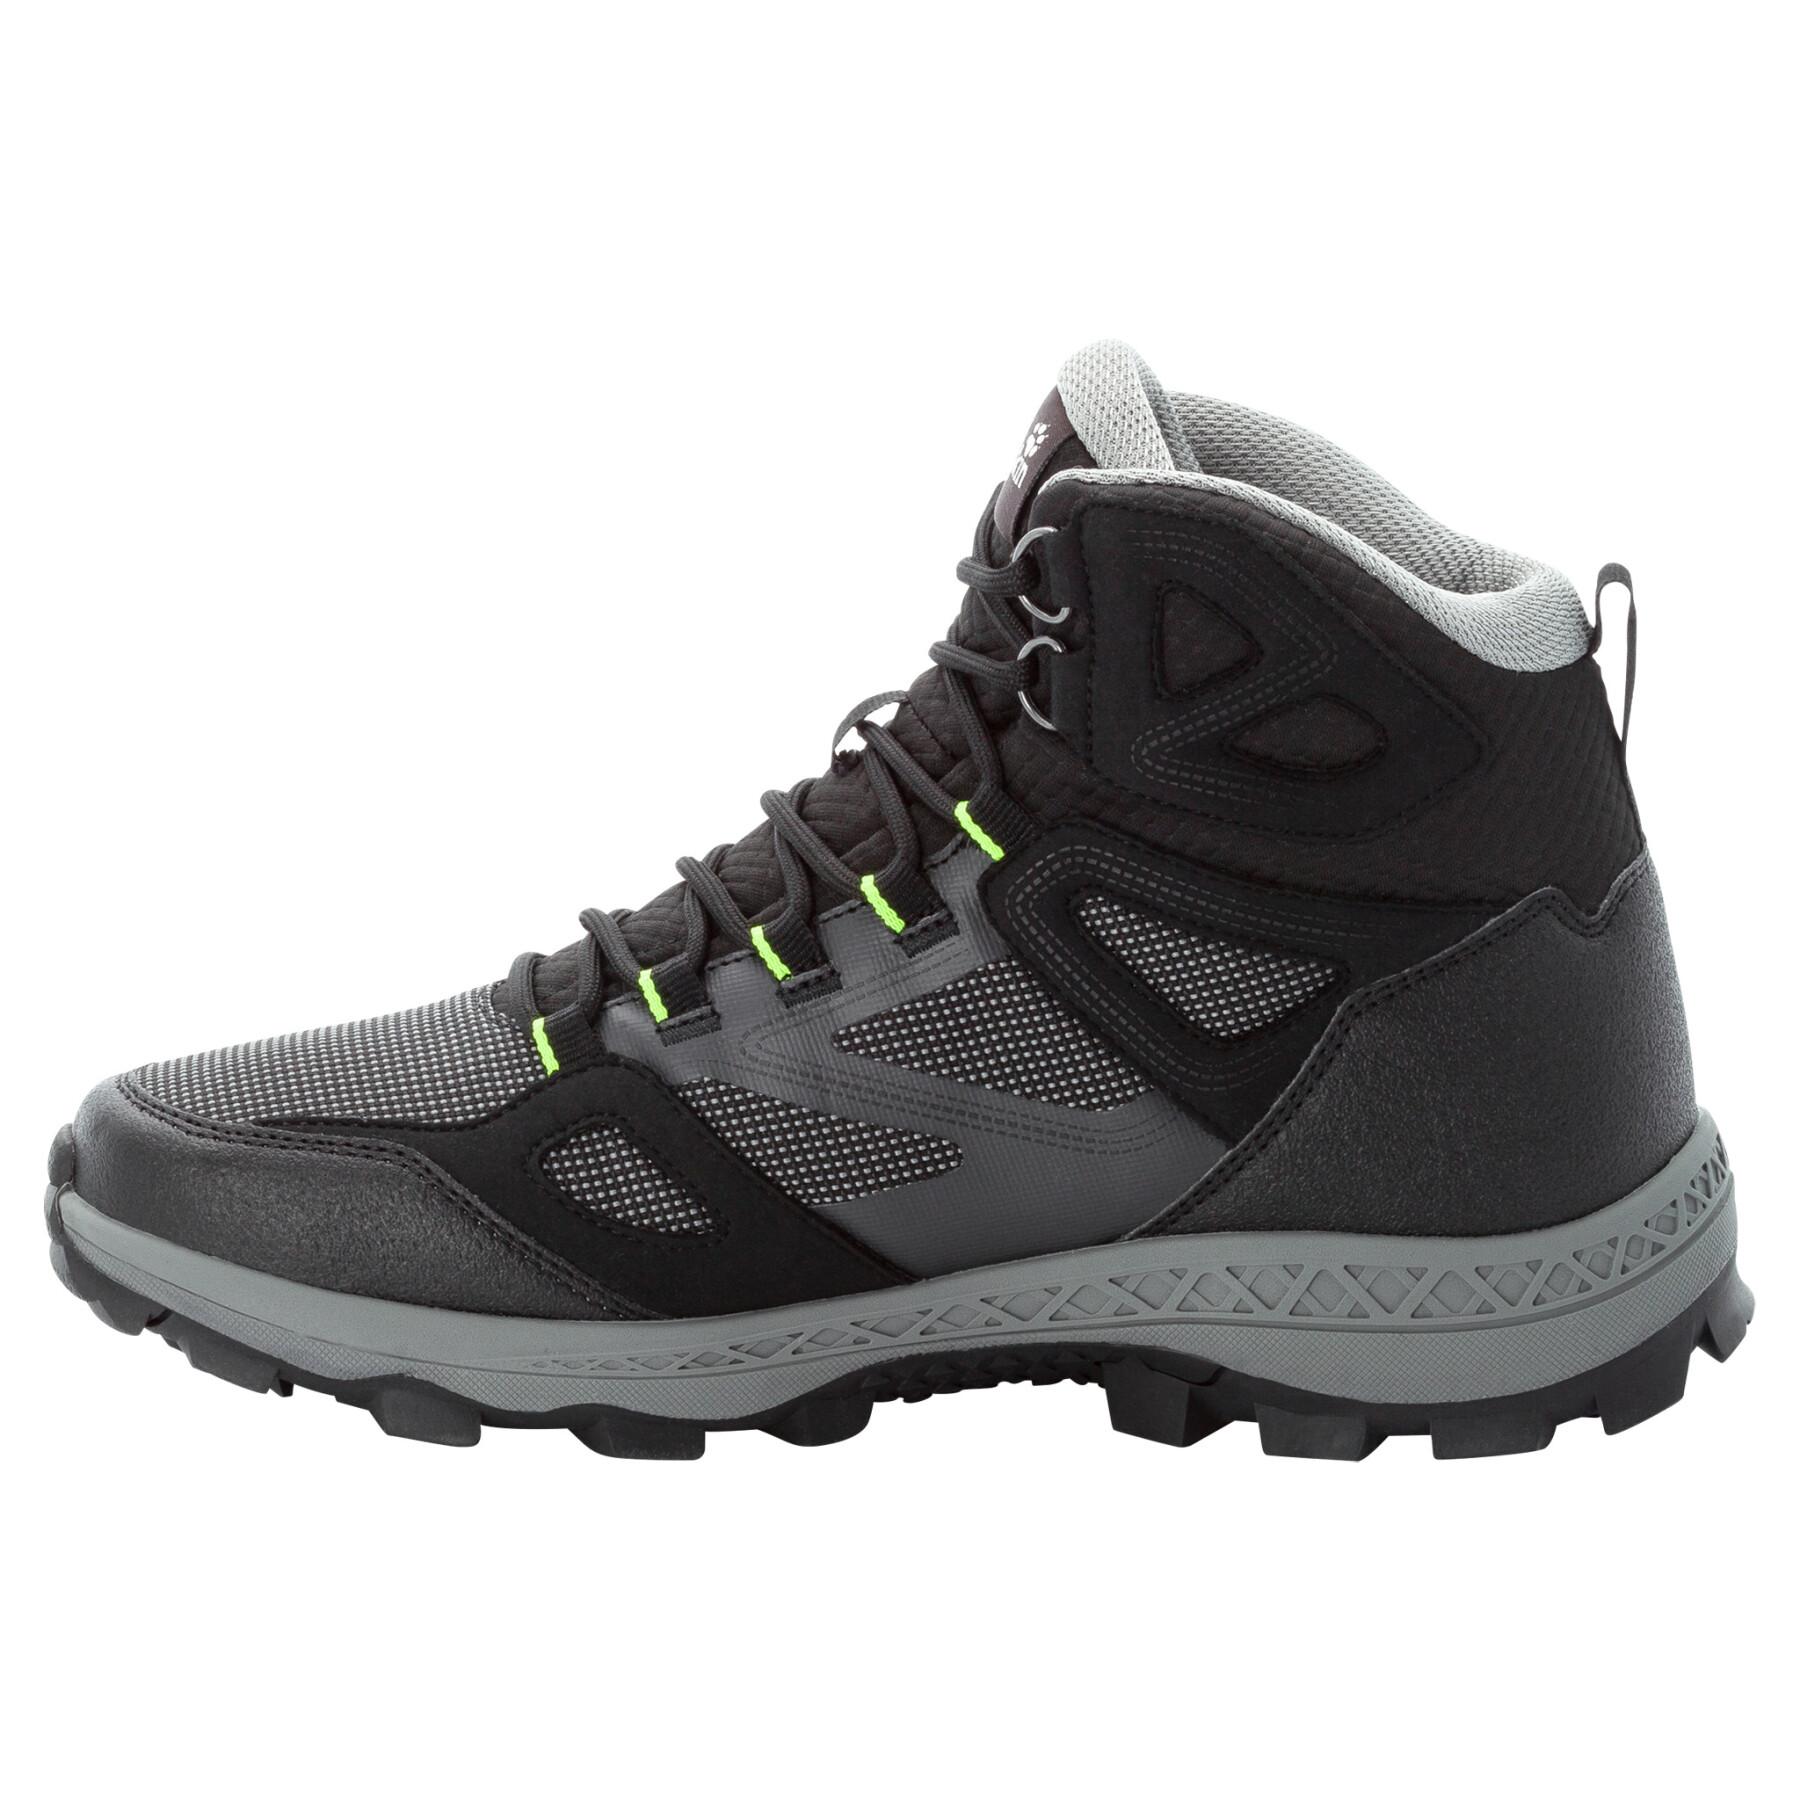 Chaussures montantes Jack Wolfskin downhill texapore